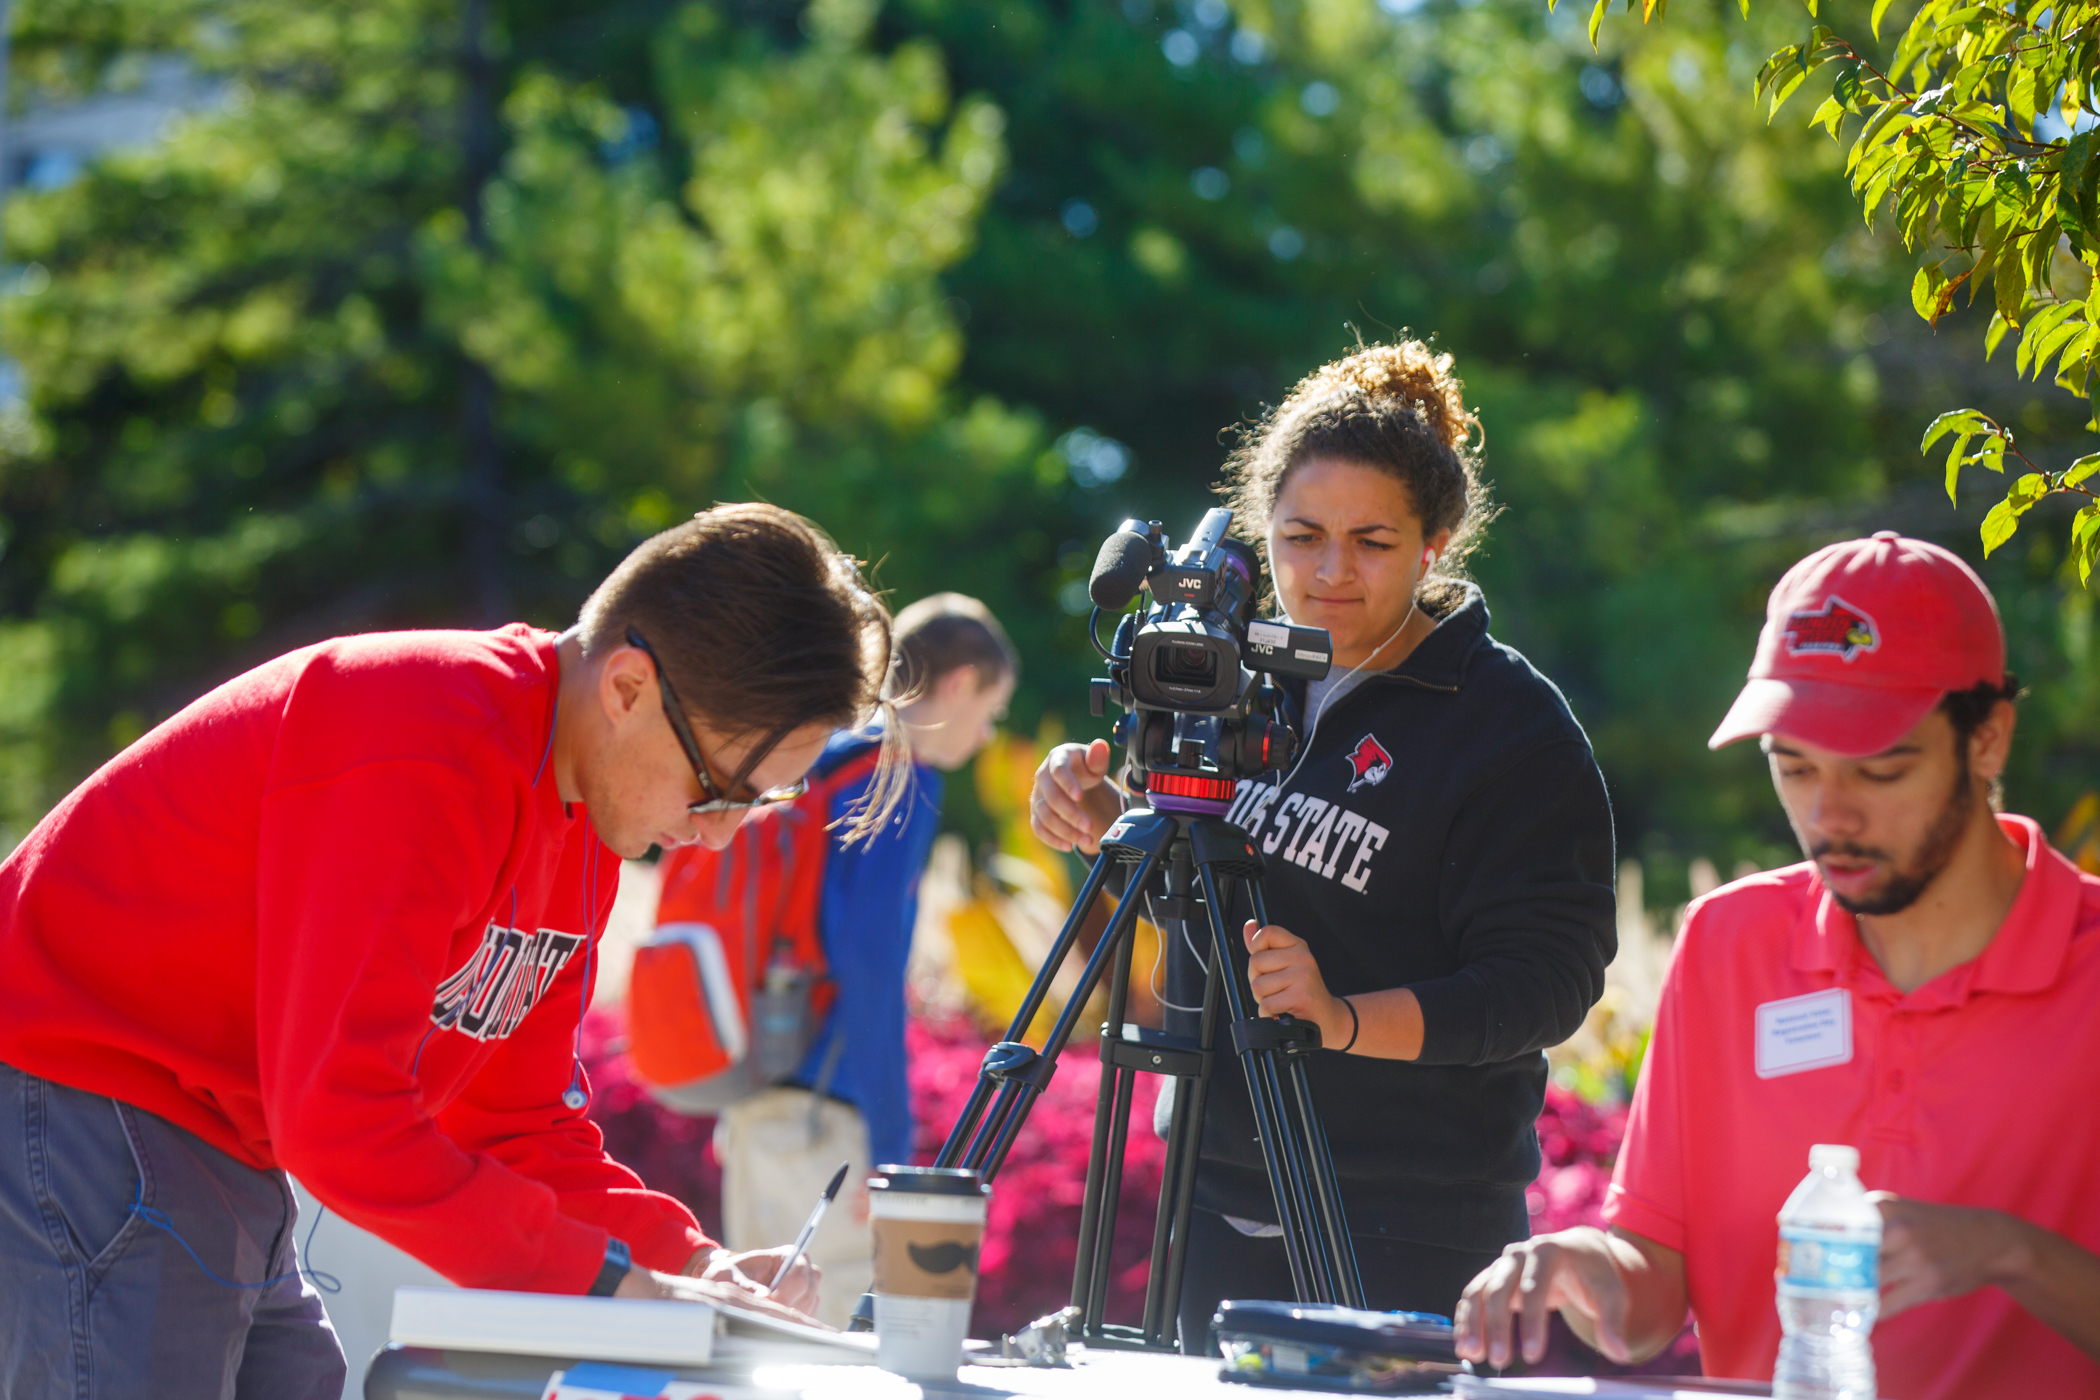 Illinois State student films with an industry-grade camera